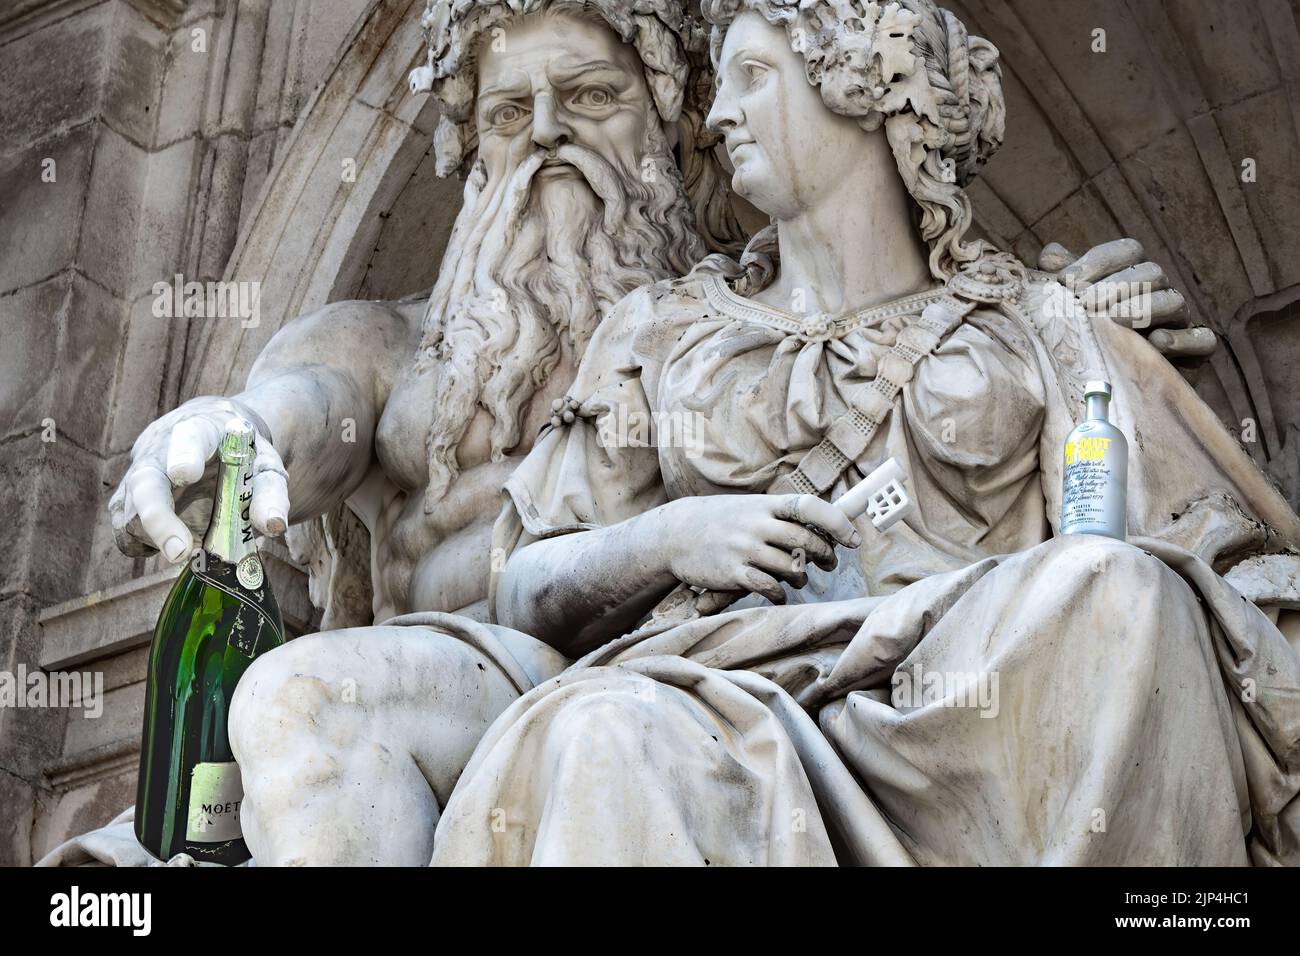 The statue of Zeus and Hera in Albertina Square, Vienna with modern alcohol bottles placed in their reach Stock Photo